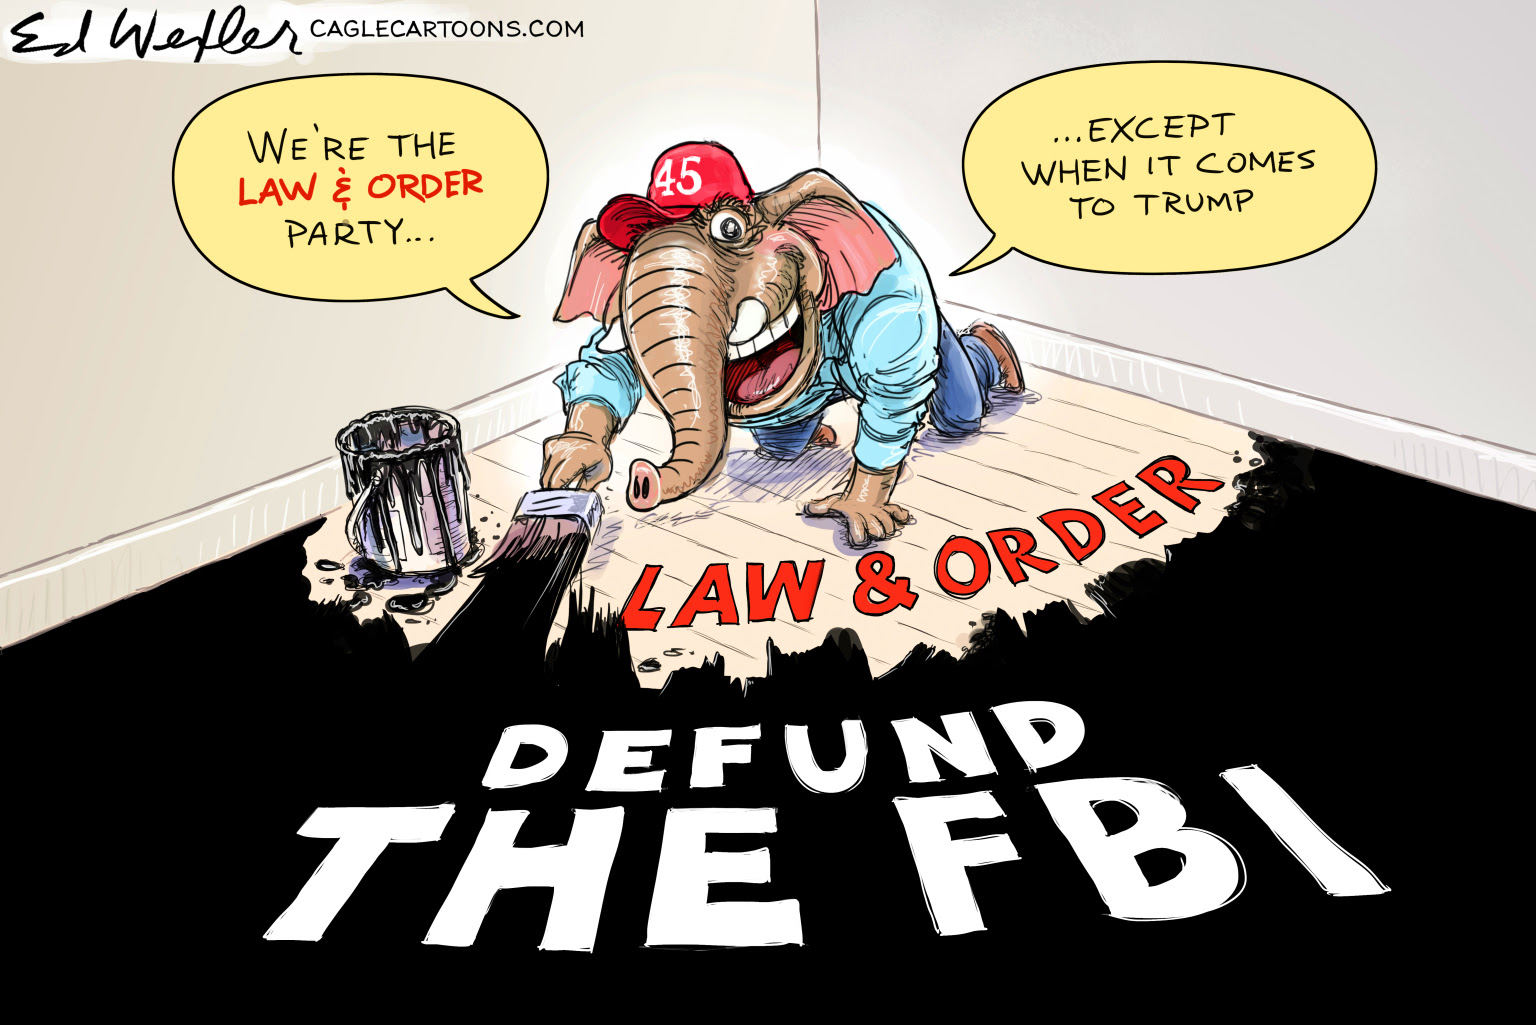 Republicans say DEFUND THE FBI. The party of Law and Order in now lawless and disorderly.